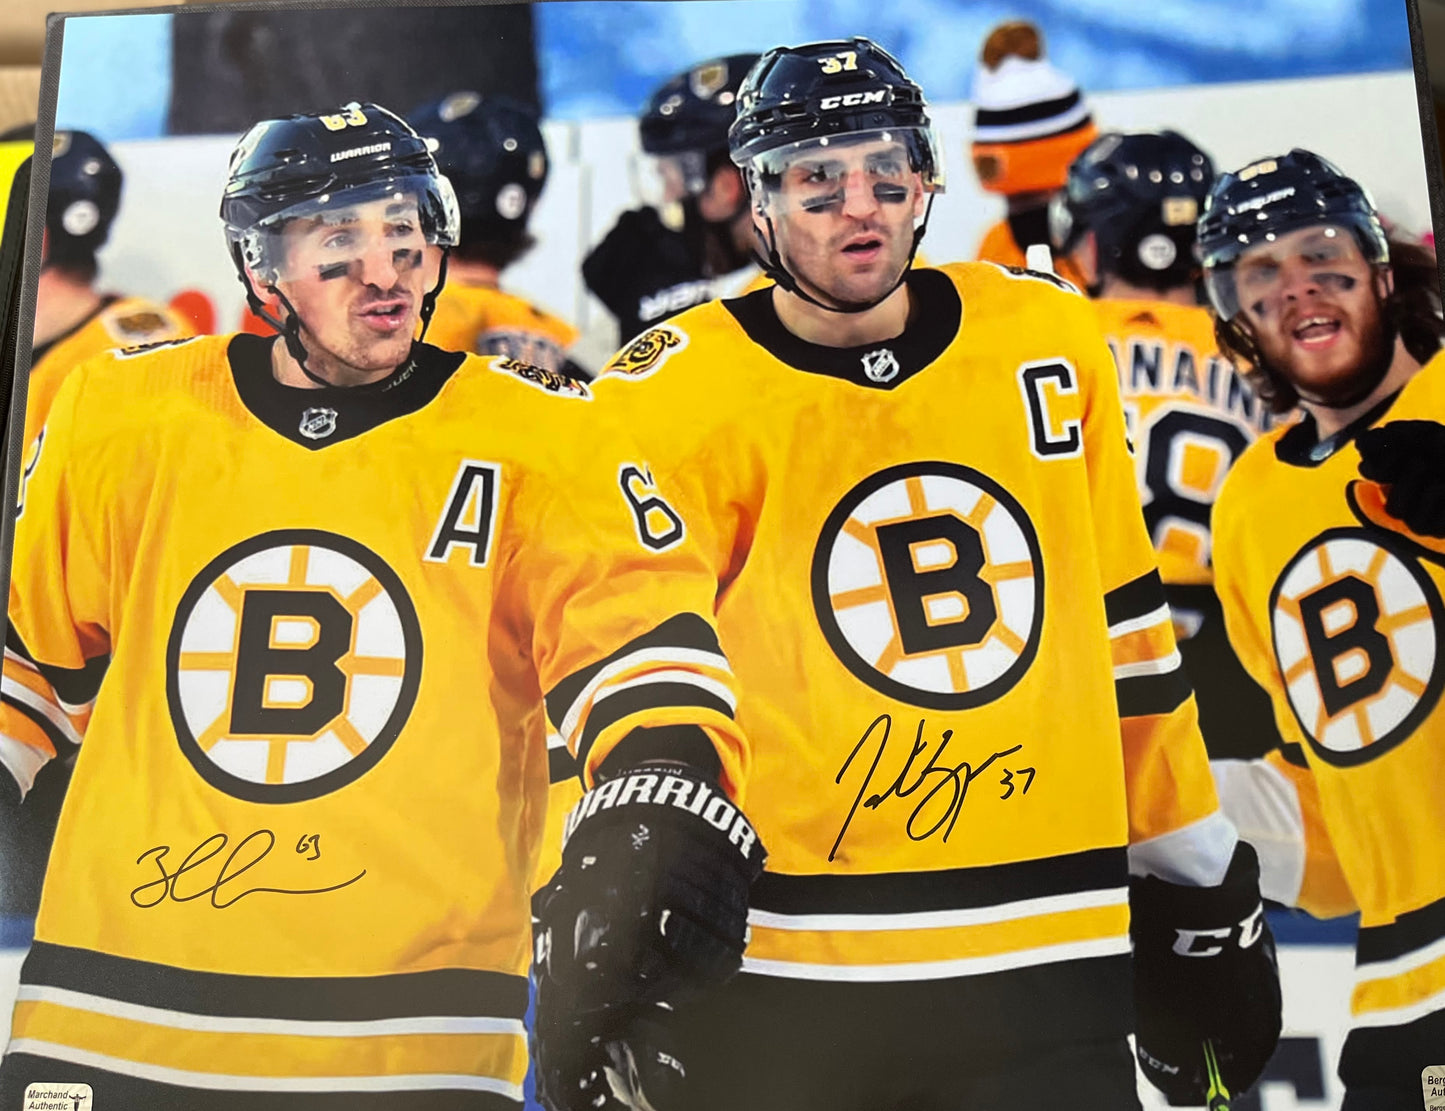 Bruins Patrice Bergeron and Brad Marchand dual signed 16x20